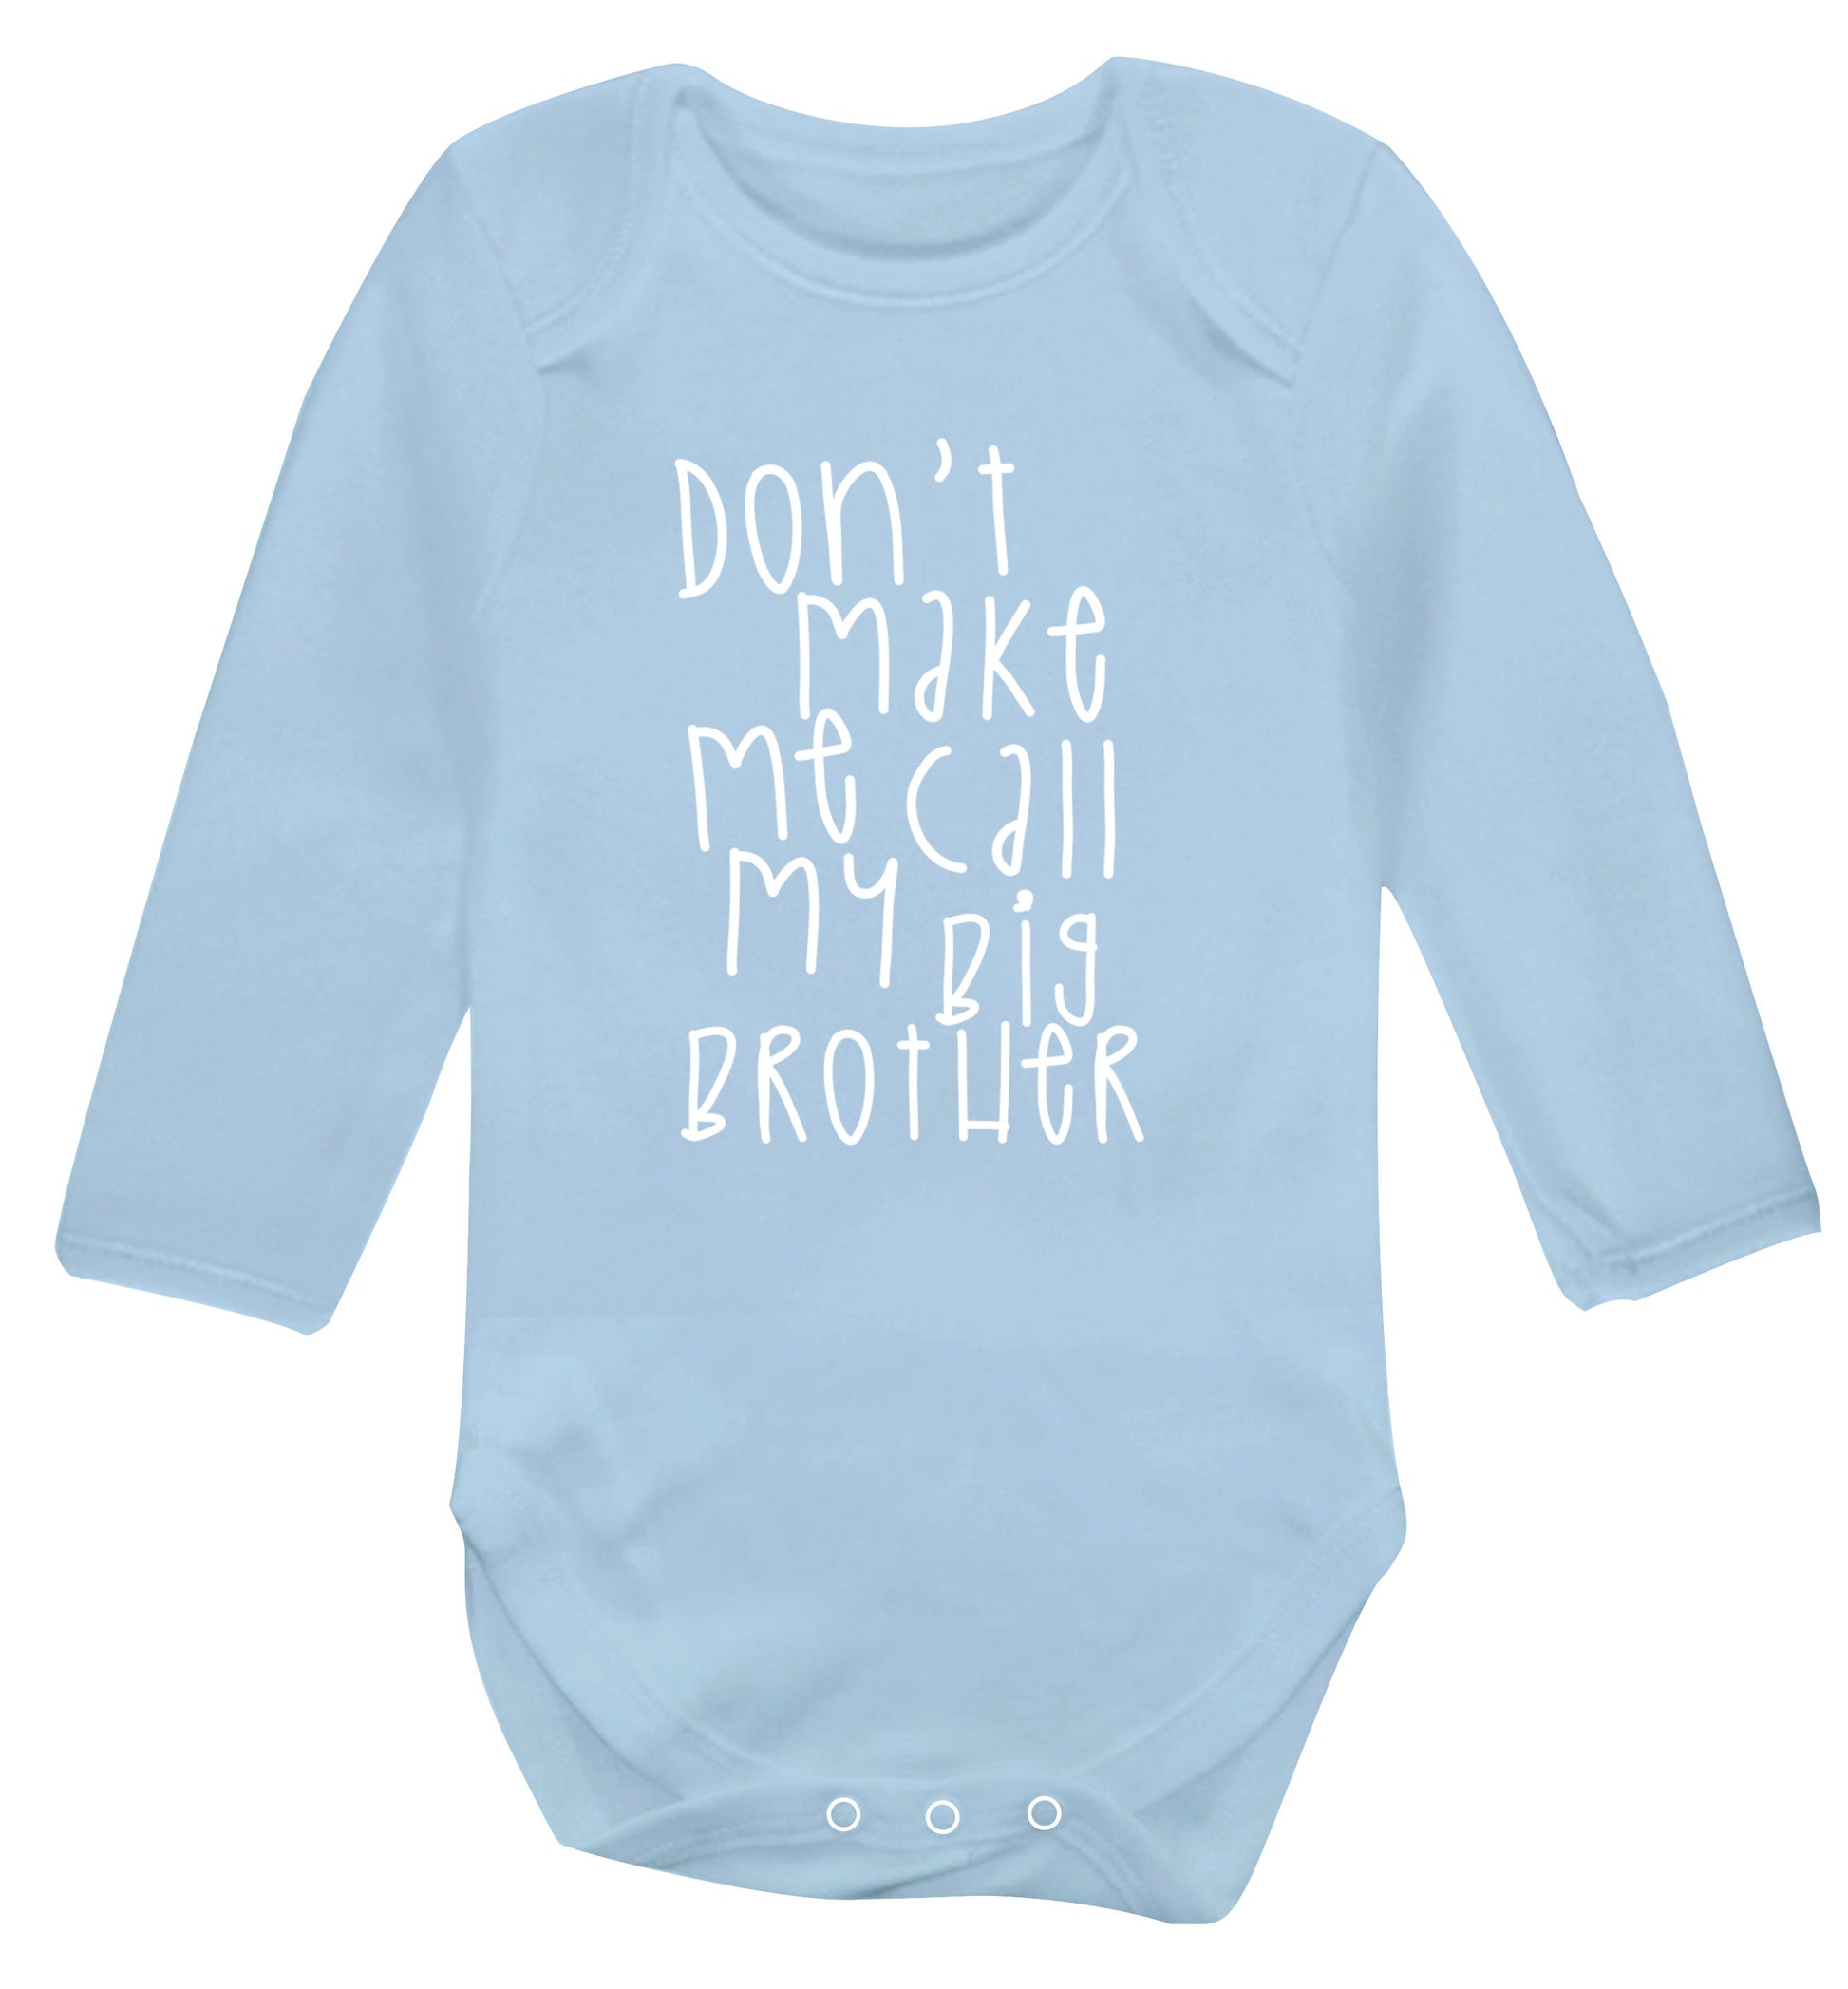 Don't make me call my big brother Baby Vest long sleeved pale blue 6-12 months